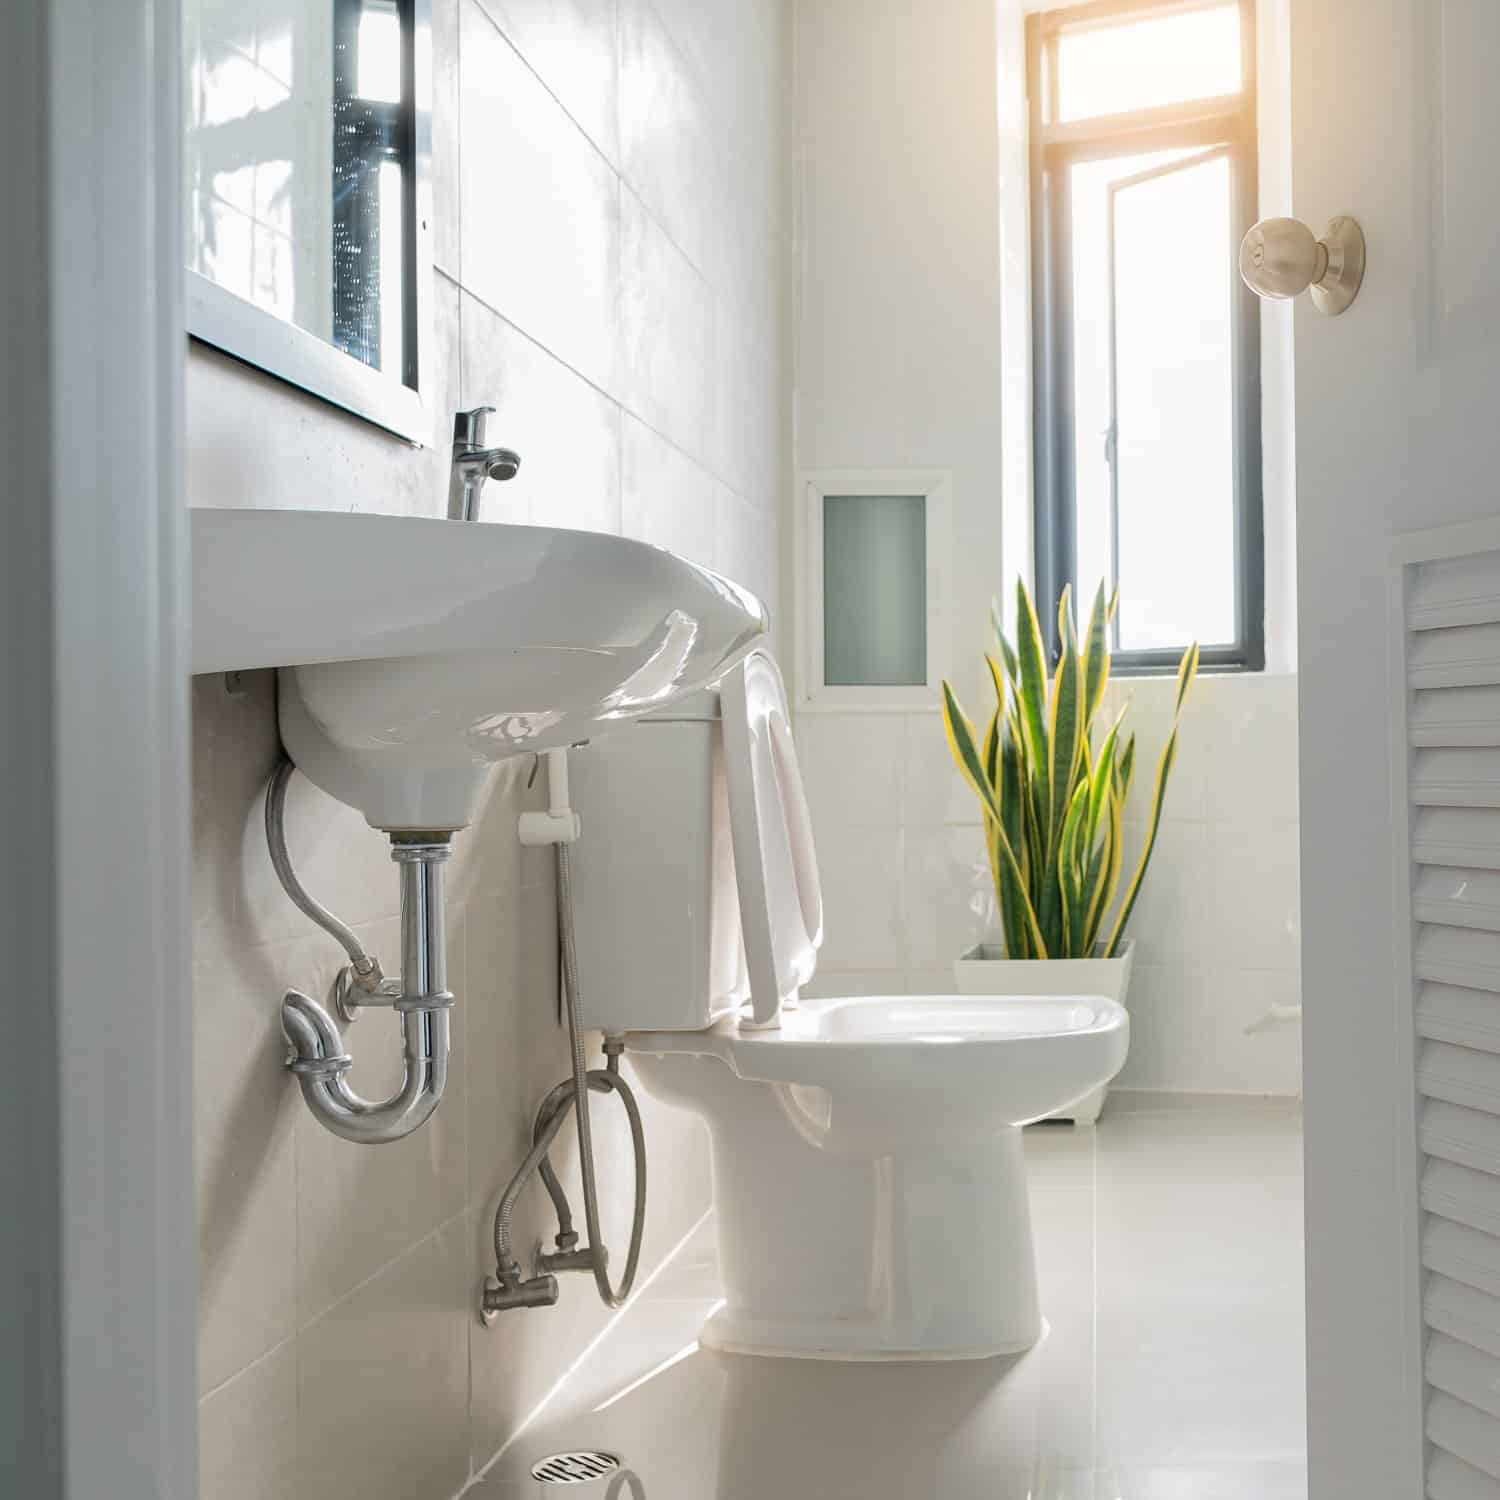 spring cleaning bathroom tips, how to spring clean, spring cleaning tips